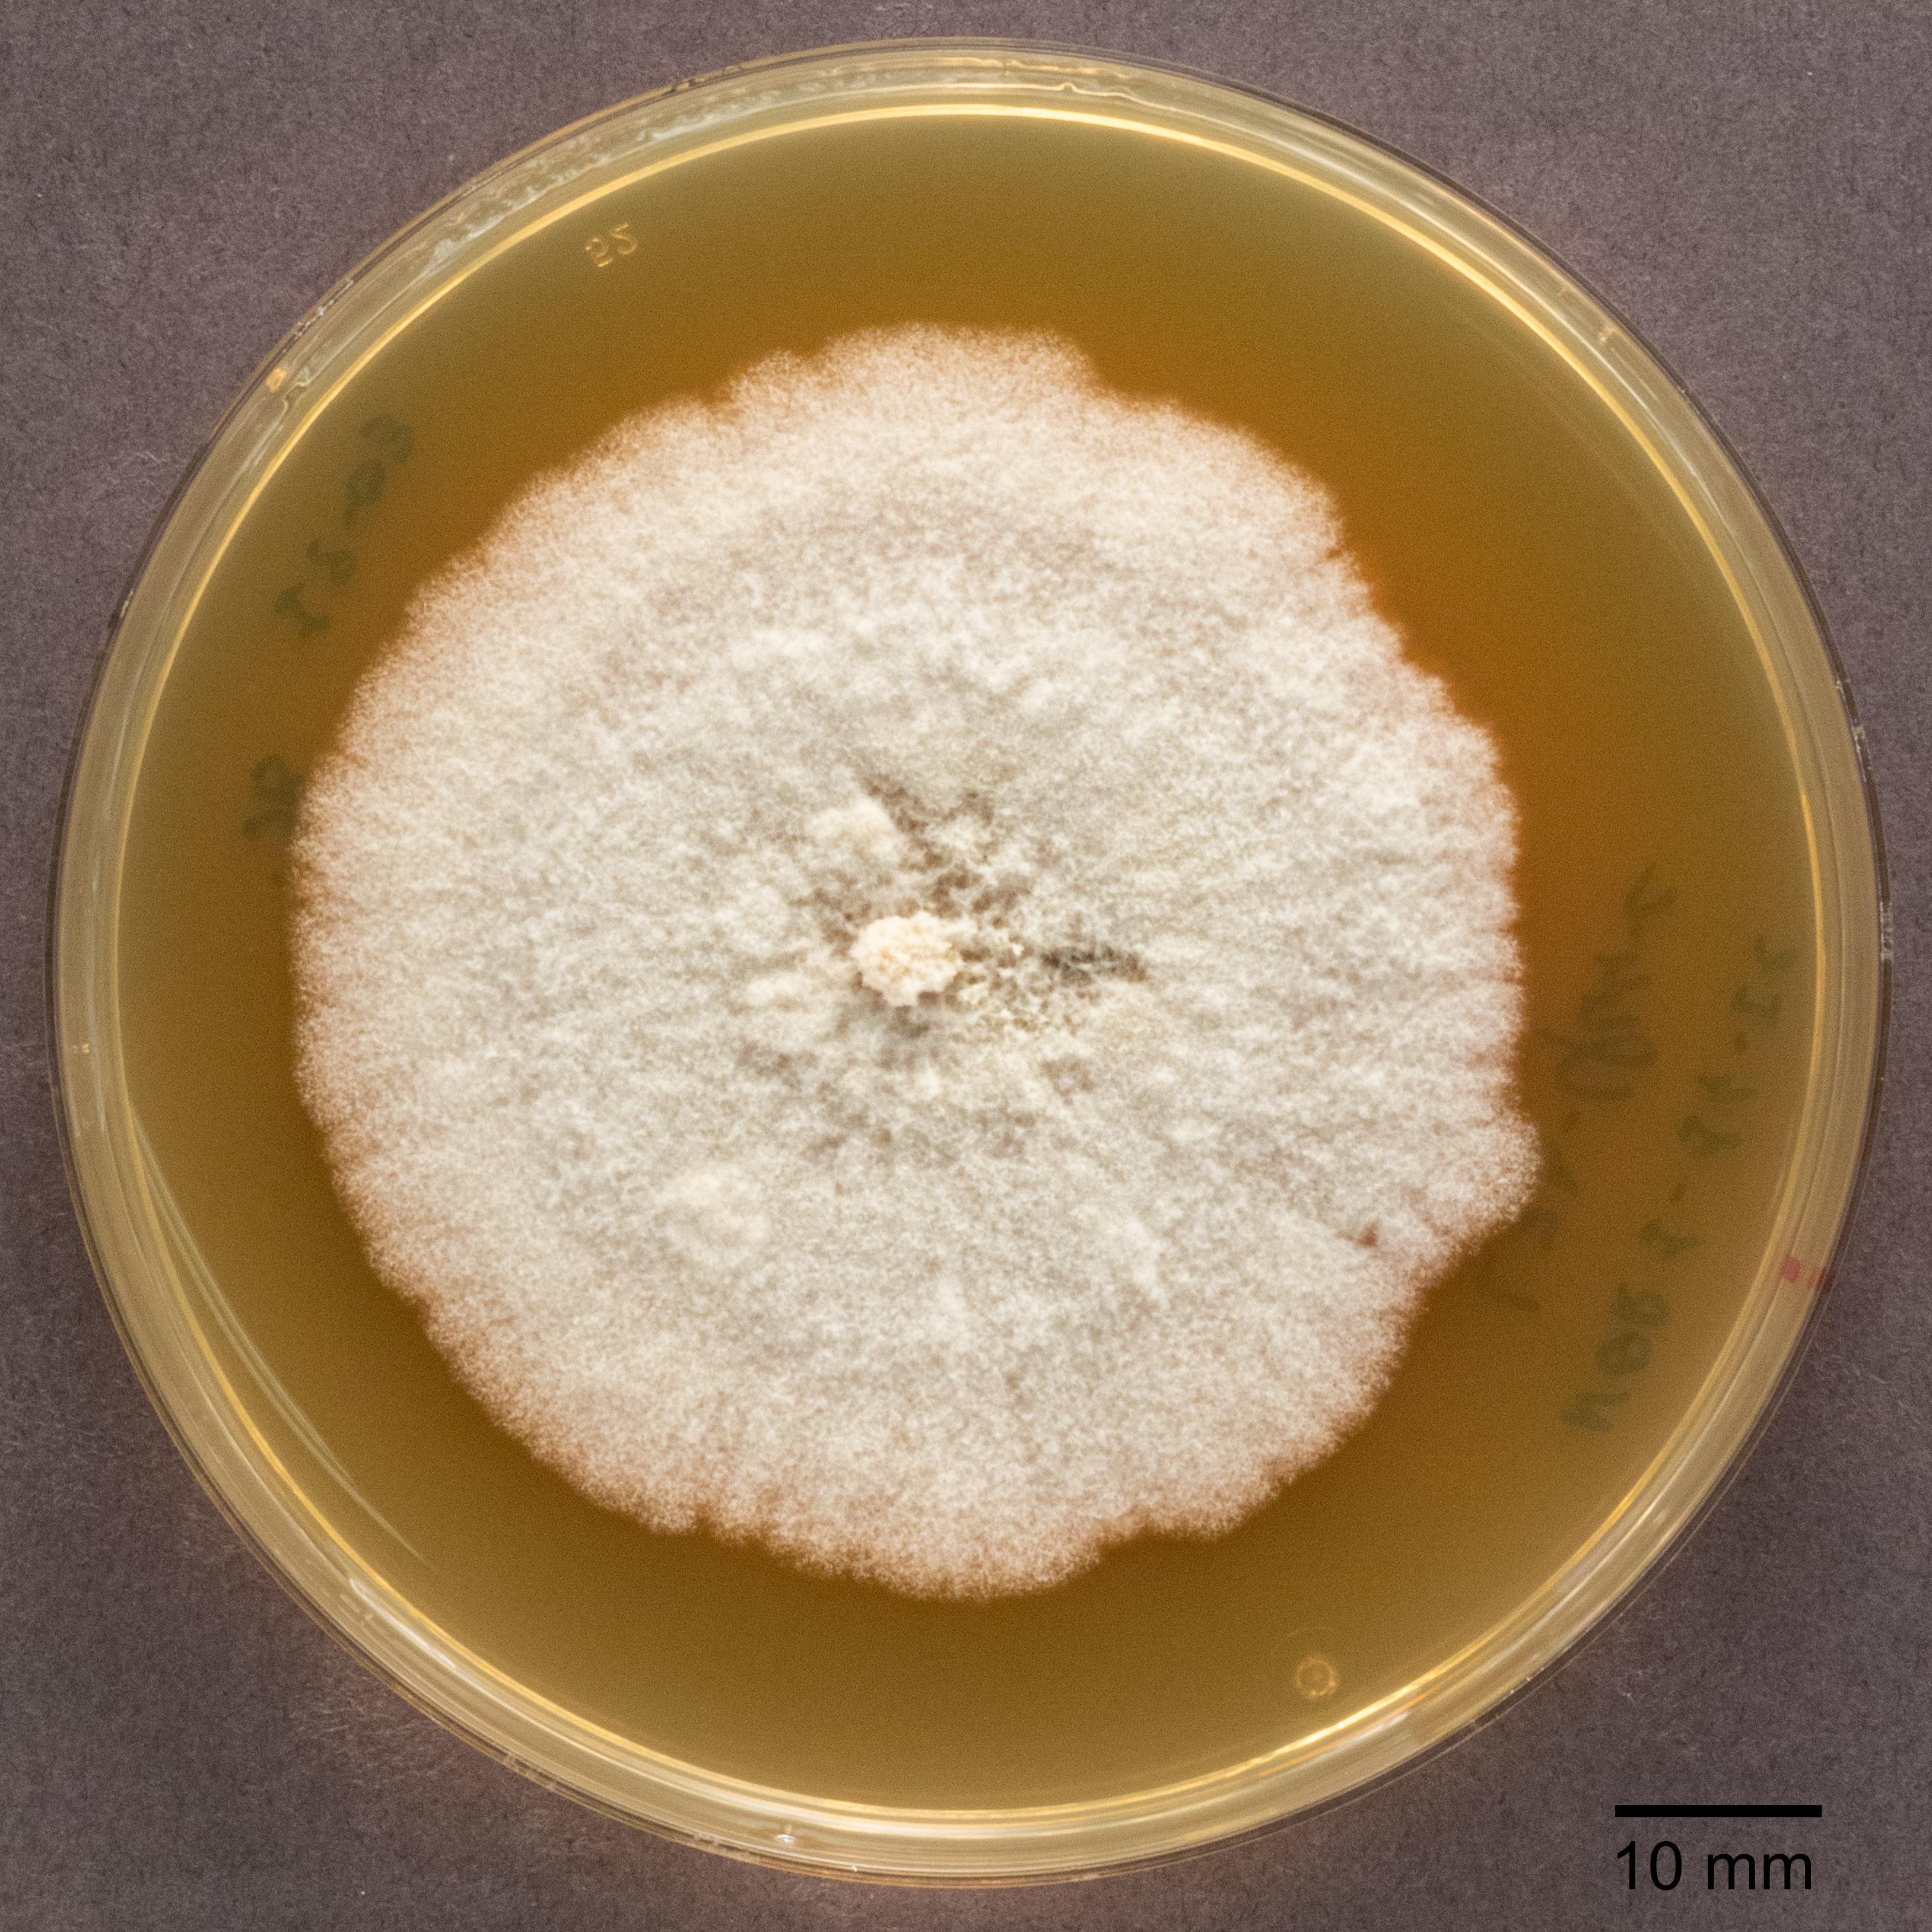 Culture of Lophodermium piceae NOR1-14_p44 growing on 2% malt extract agar. The image was taken at 28 days by Marie Leys.